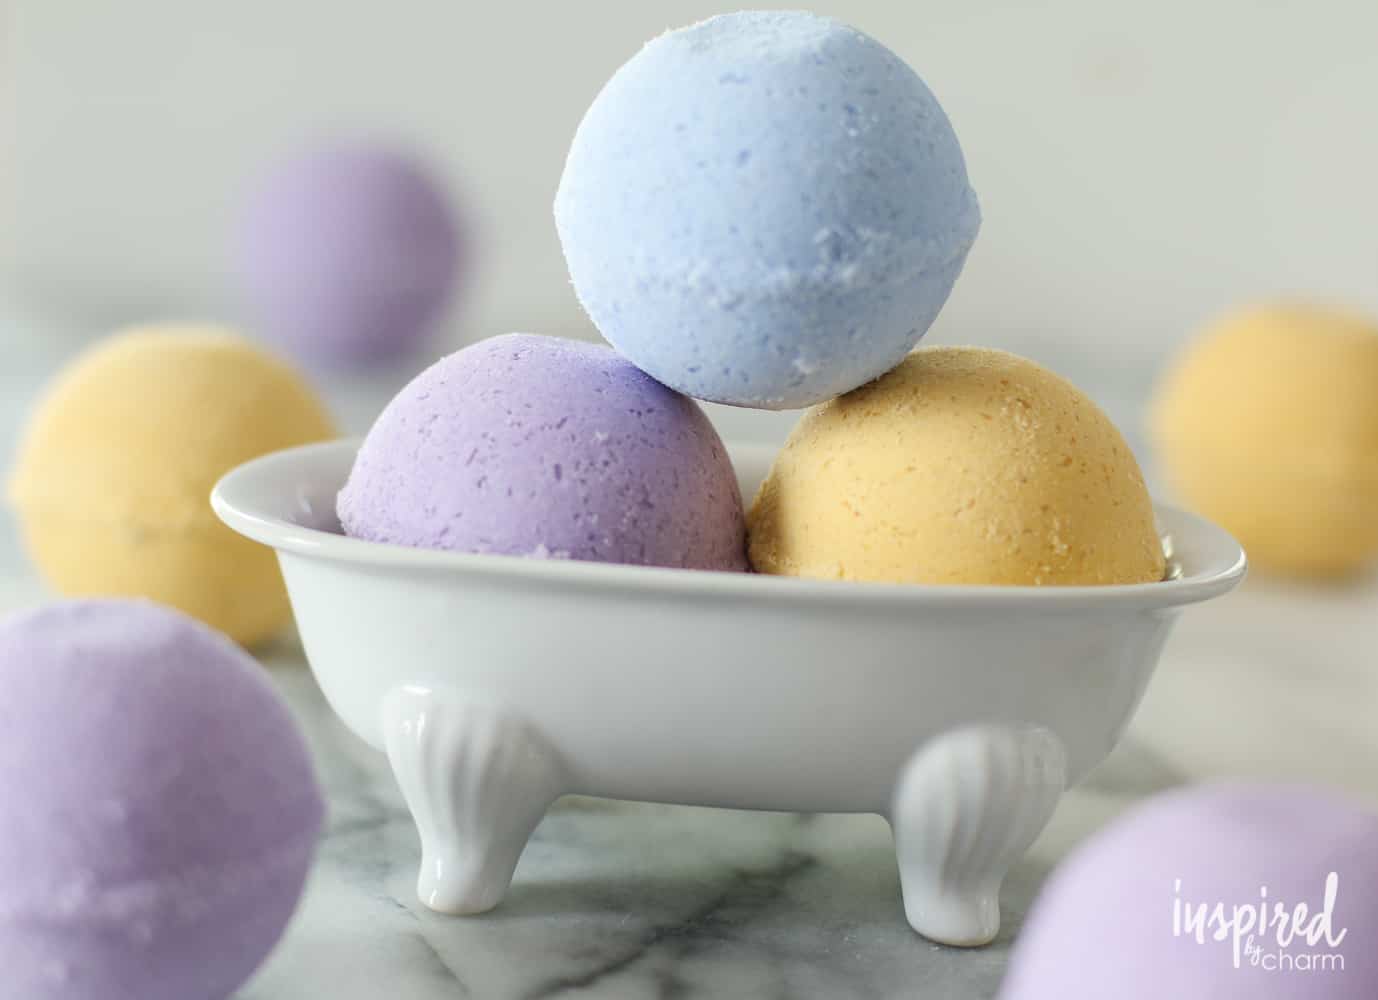 Rejuvenate your senses with these DIY bath bombs inspired by spa